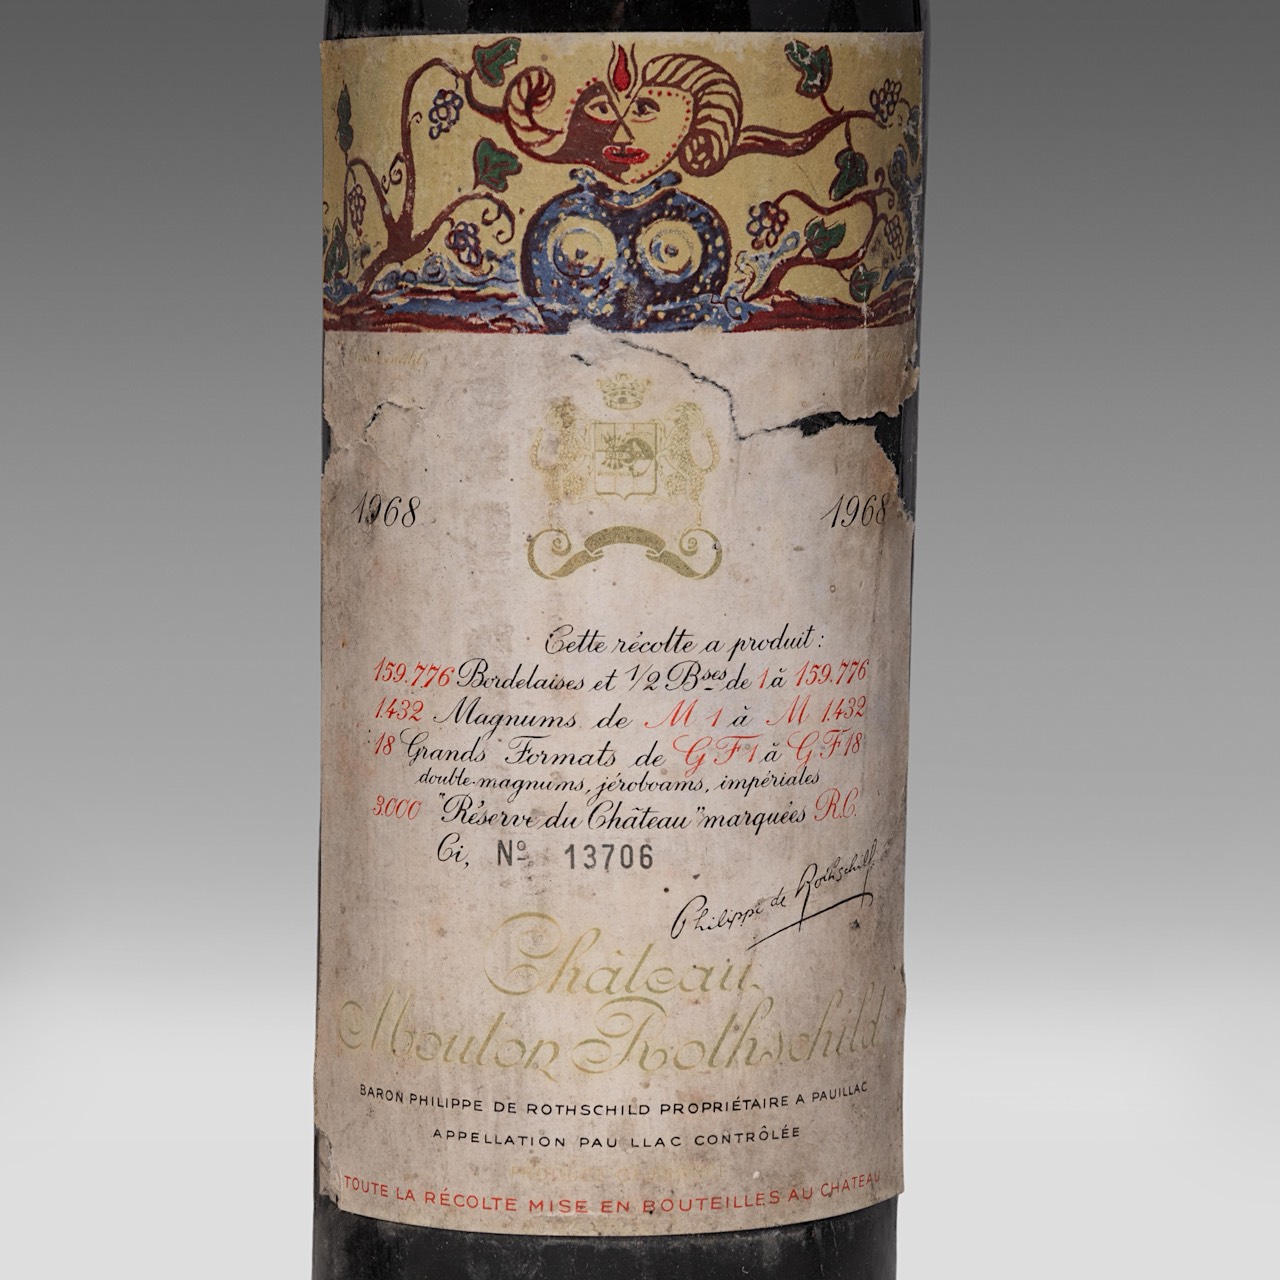 Two bottles 1968 Chateau Mouton Rothschild and a 1990 Chateau Mouton Rothschild - Image 3 of 5